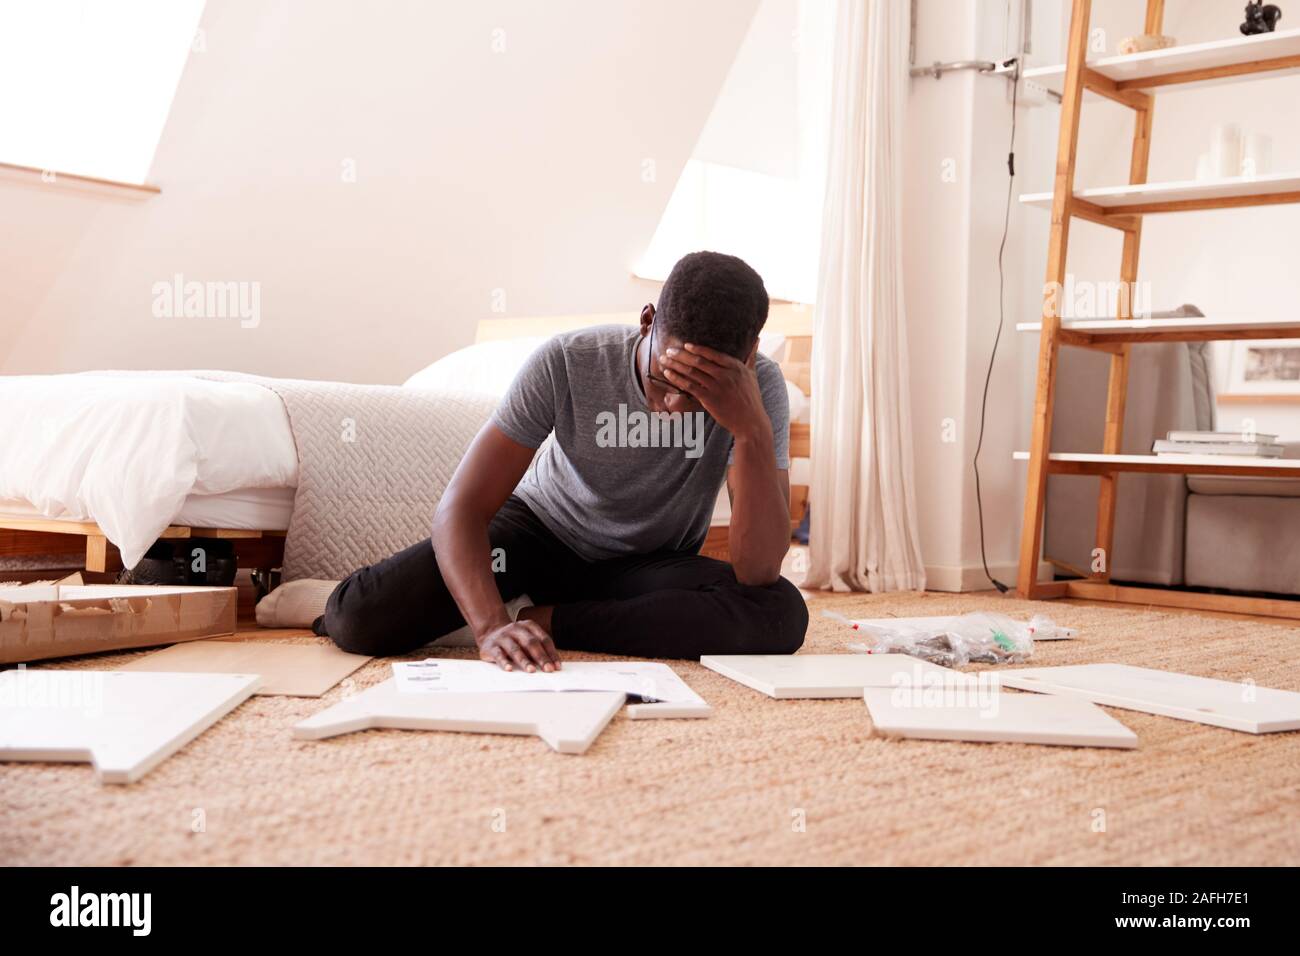 Frustrated Man In New Home Putting Together Self Assembly Furniture Stock Photo